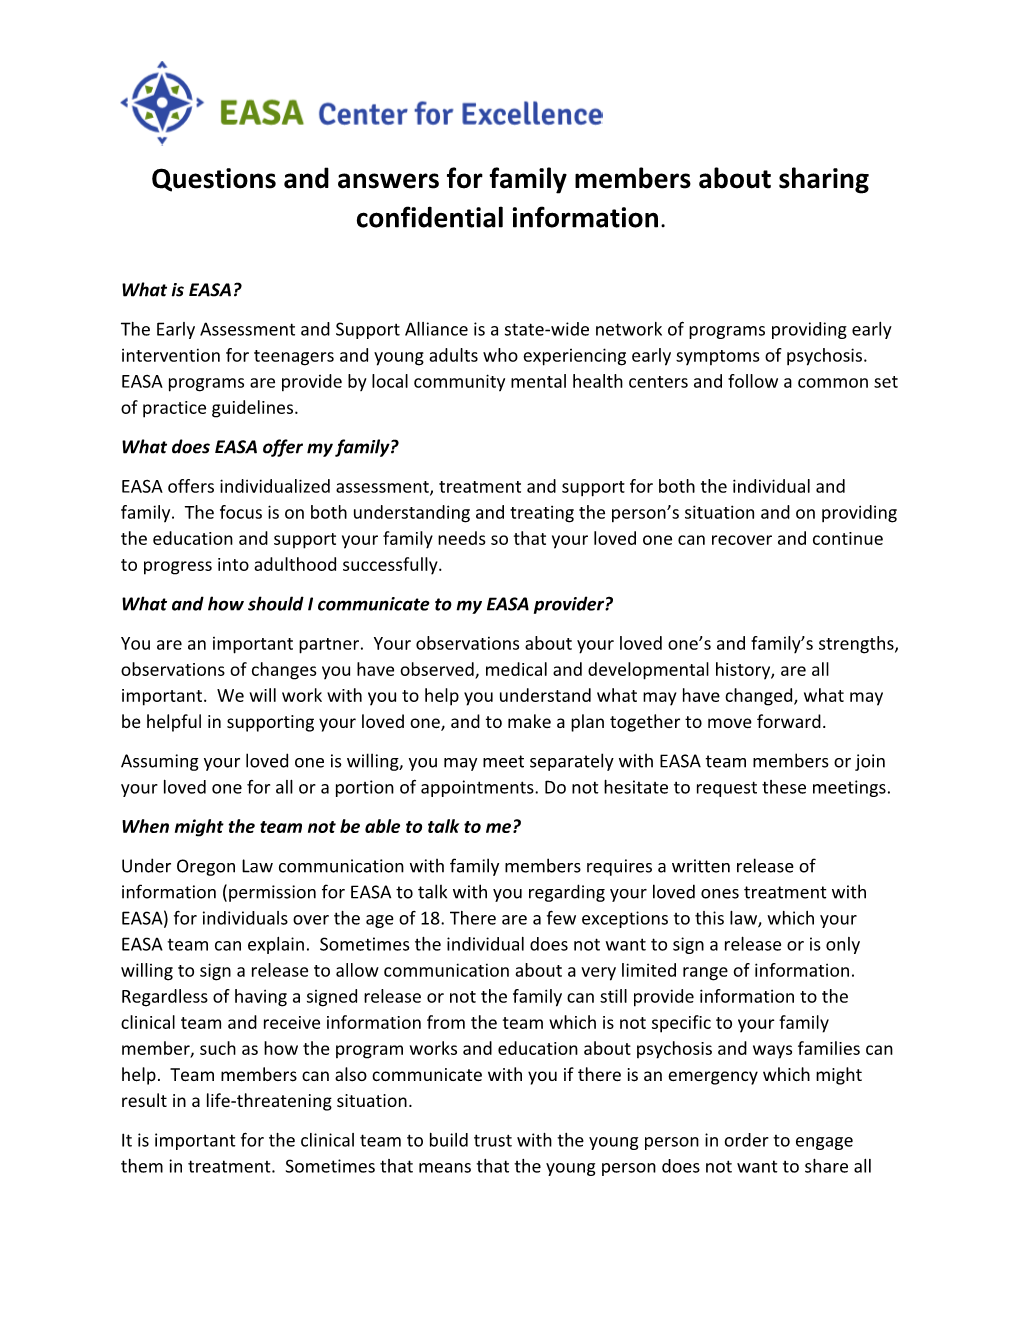 Questions and Answers for Family Members About Sharing Confidential Information